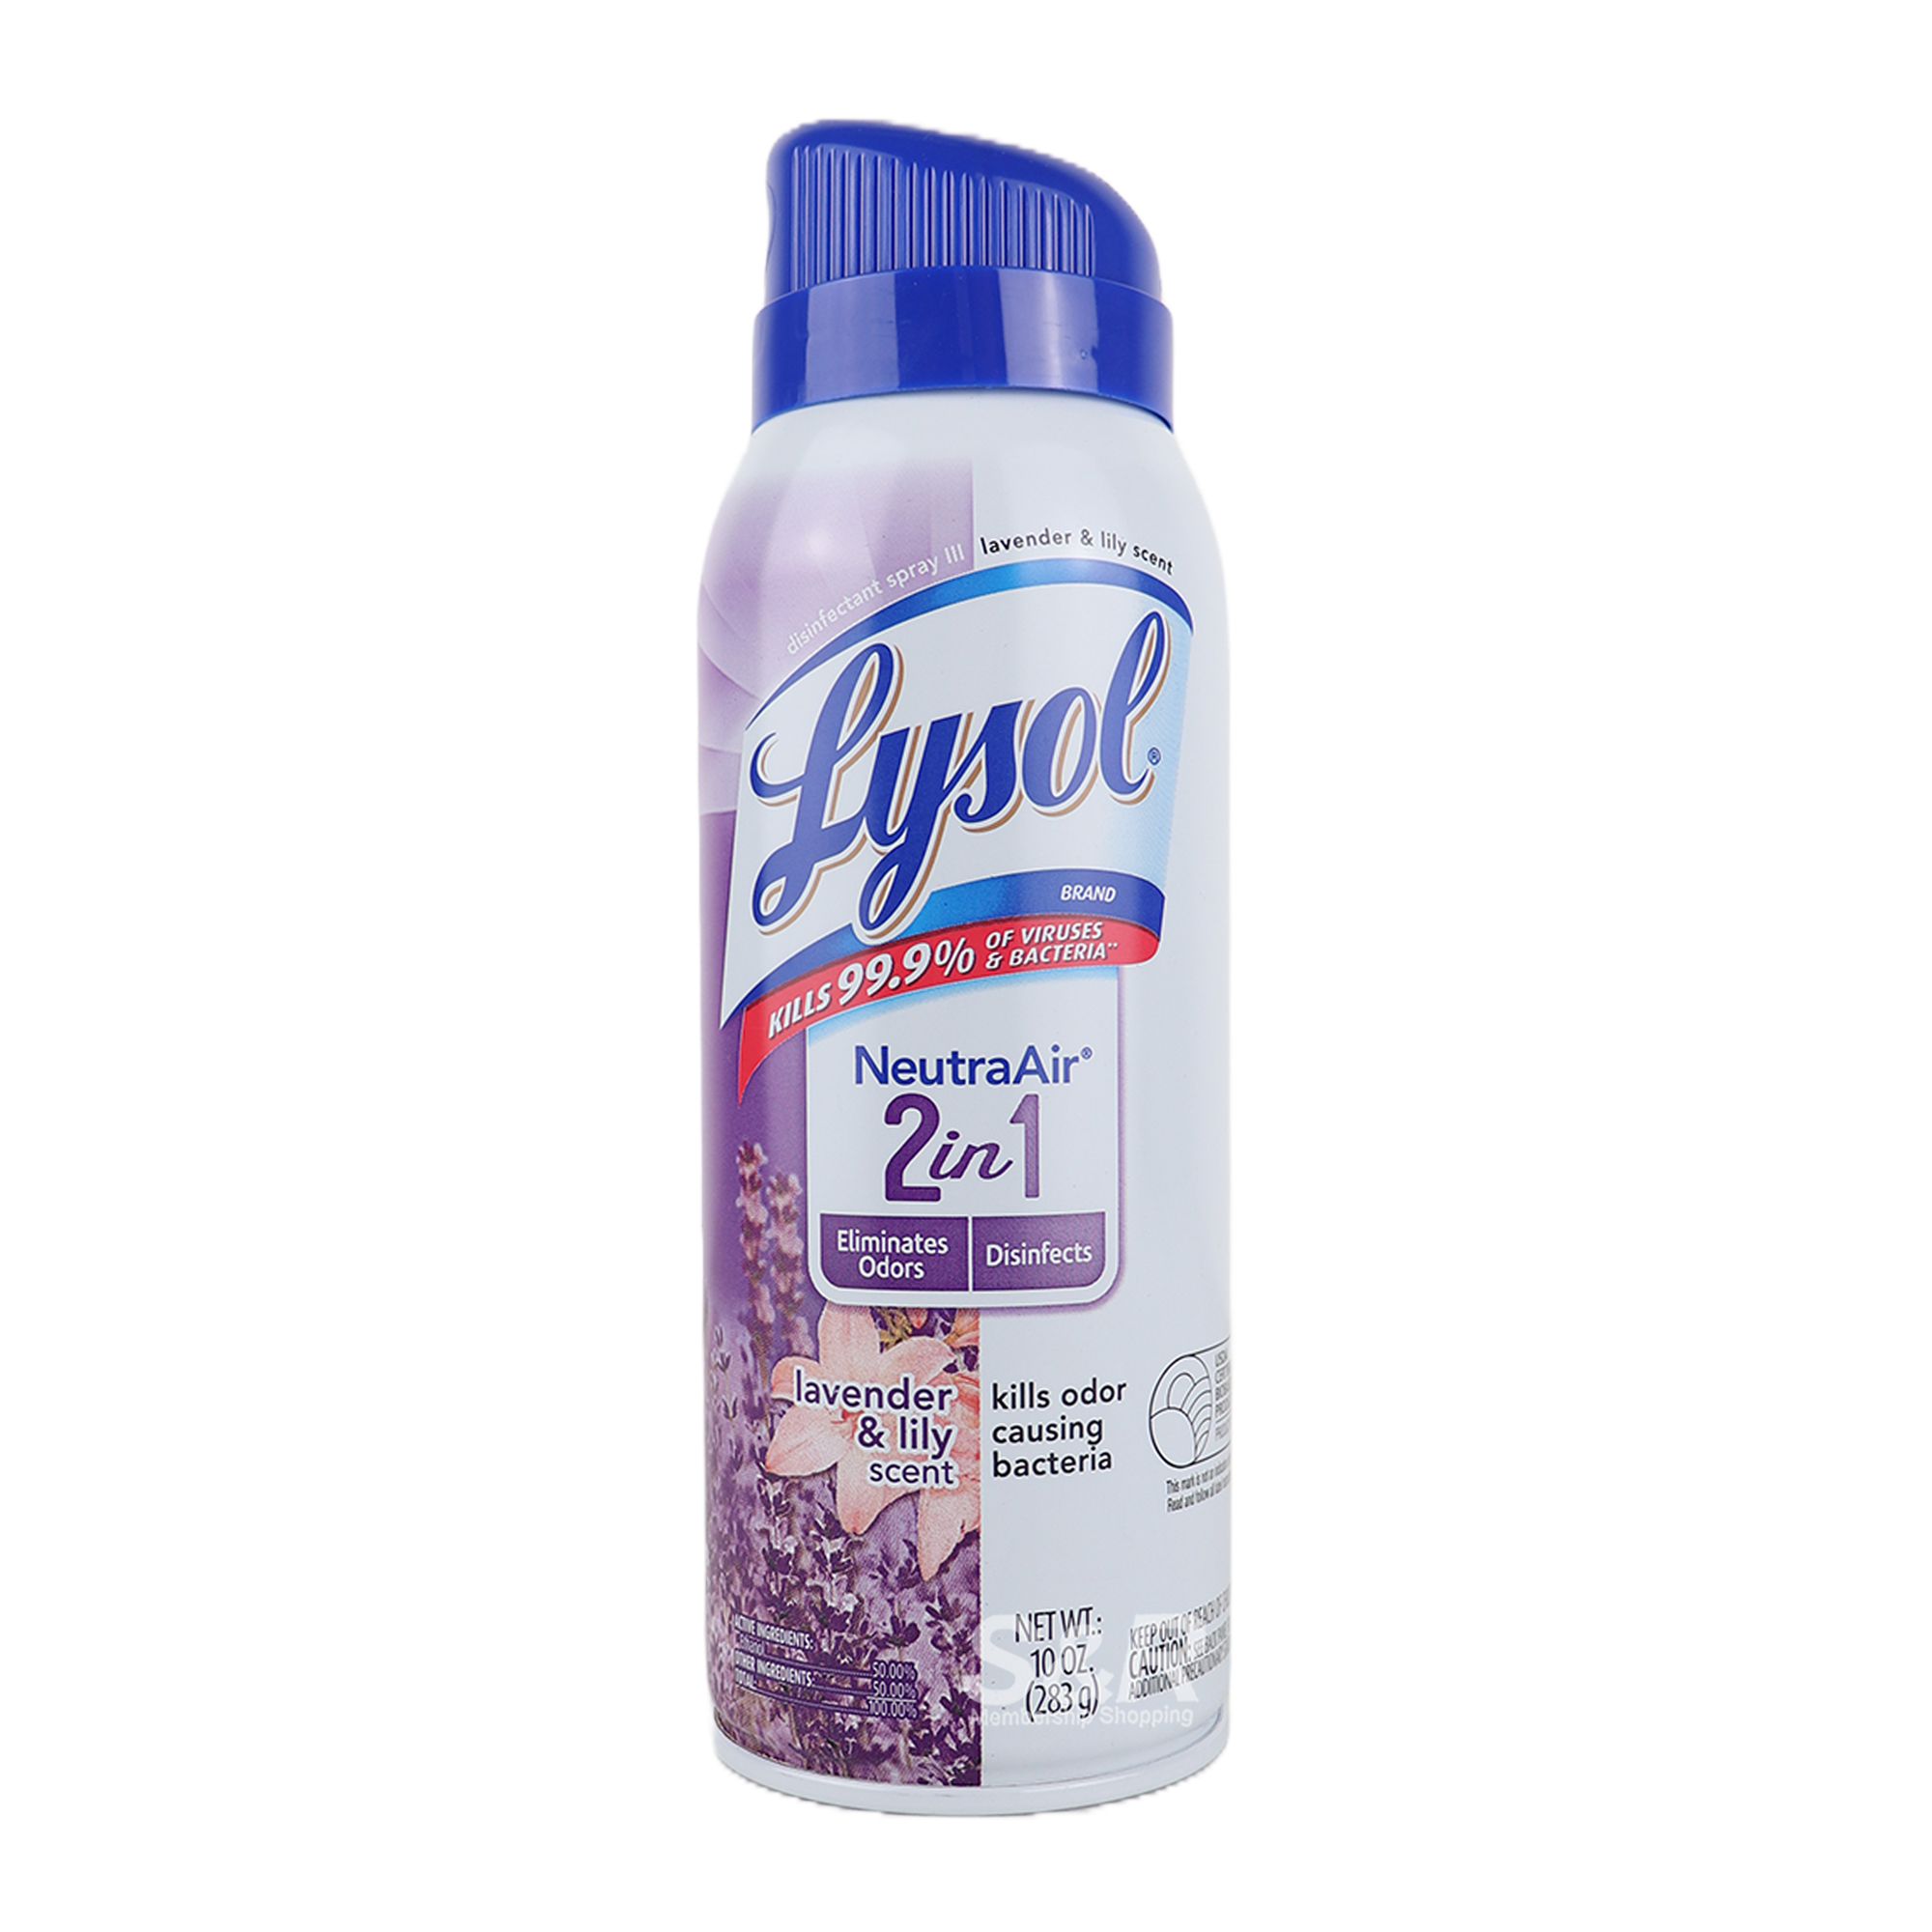 Lysol Neutra Air Lavender & Lily Disinfectant Spray 283g